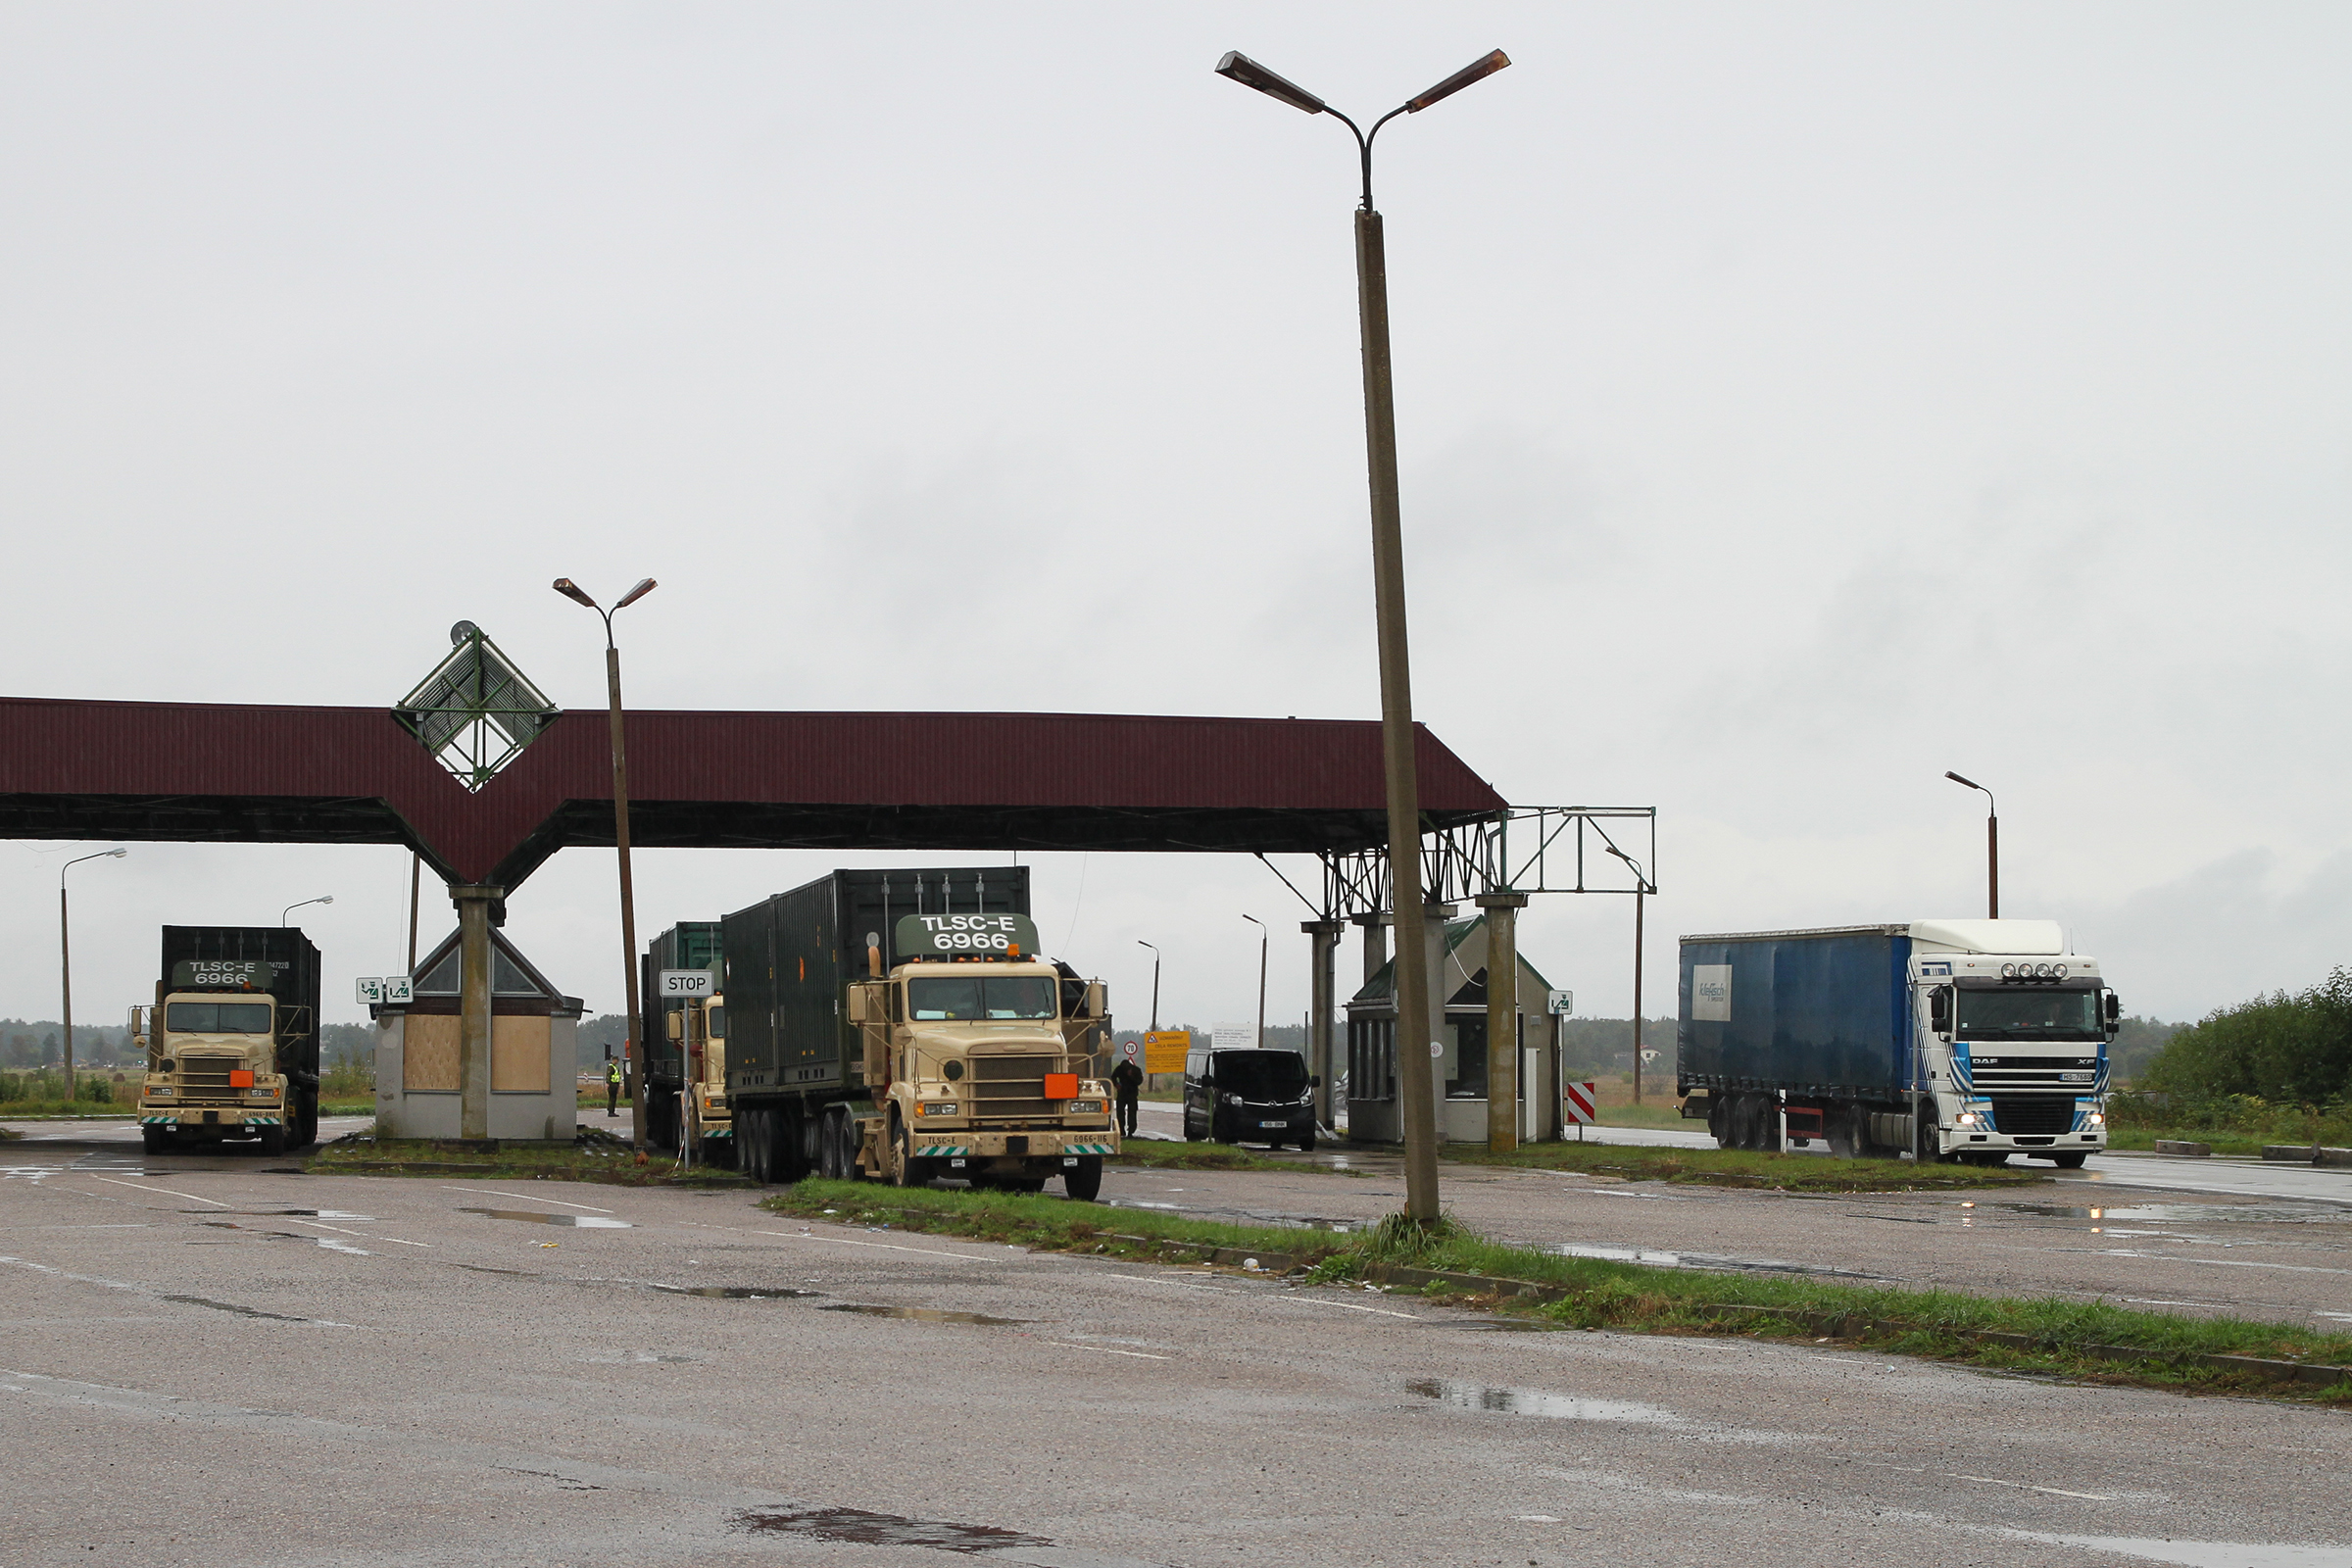 Corridor 1. E67 Adaži, Latvia: Triggered by the fear of a potential Russian invasion, NATO shows significant presence in Baltic nations. Here a convoy of NATO trucks heading north, stops at an abandoned border station.